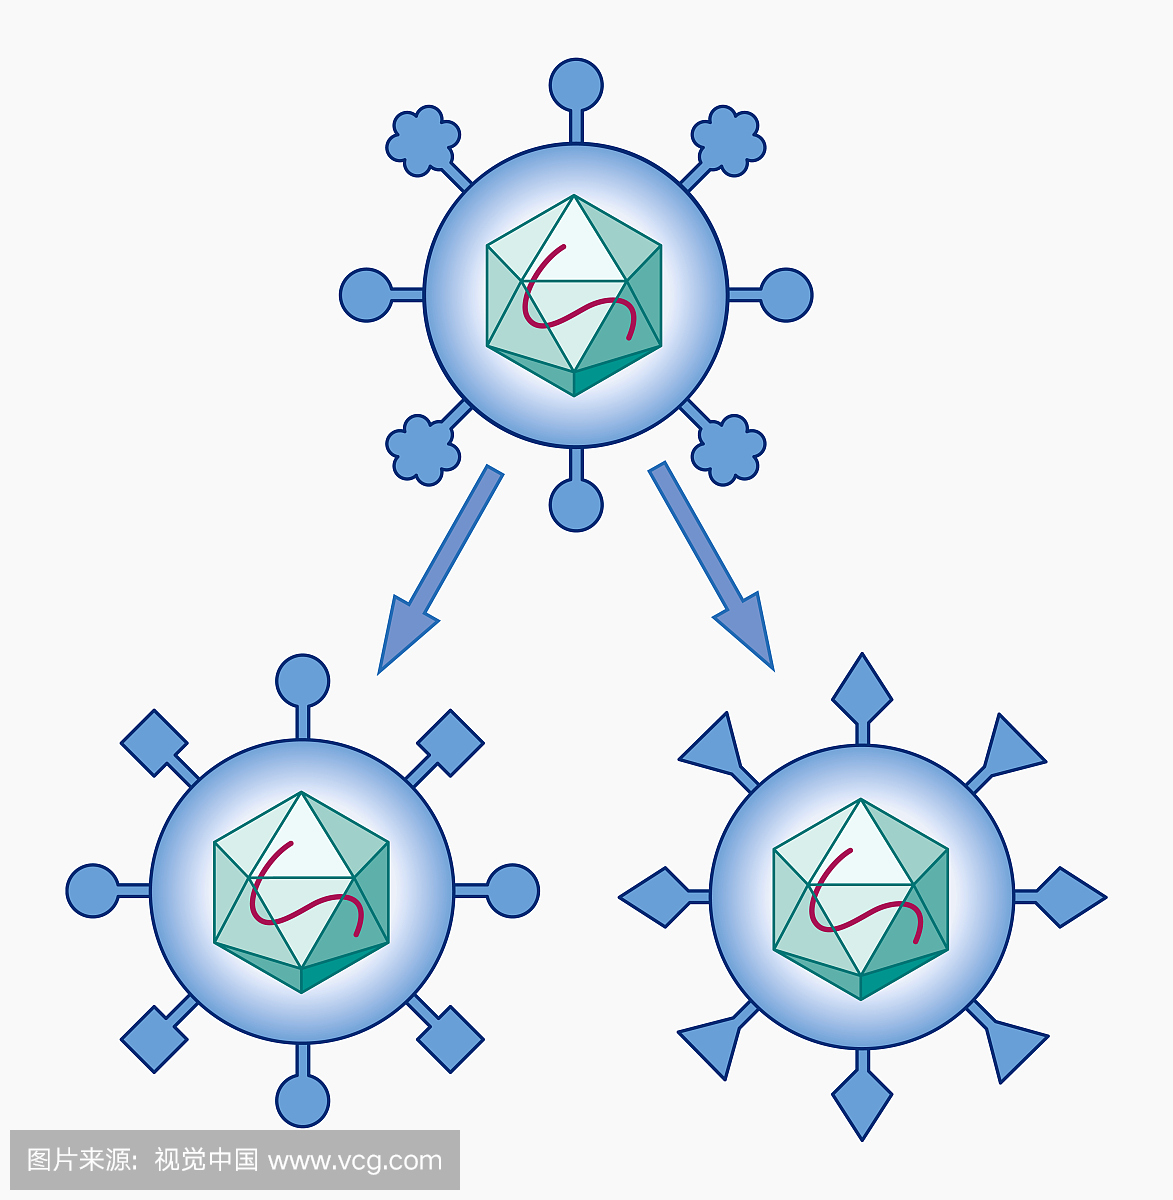 ns, altered proteins in virus after antigenic shift,